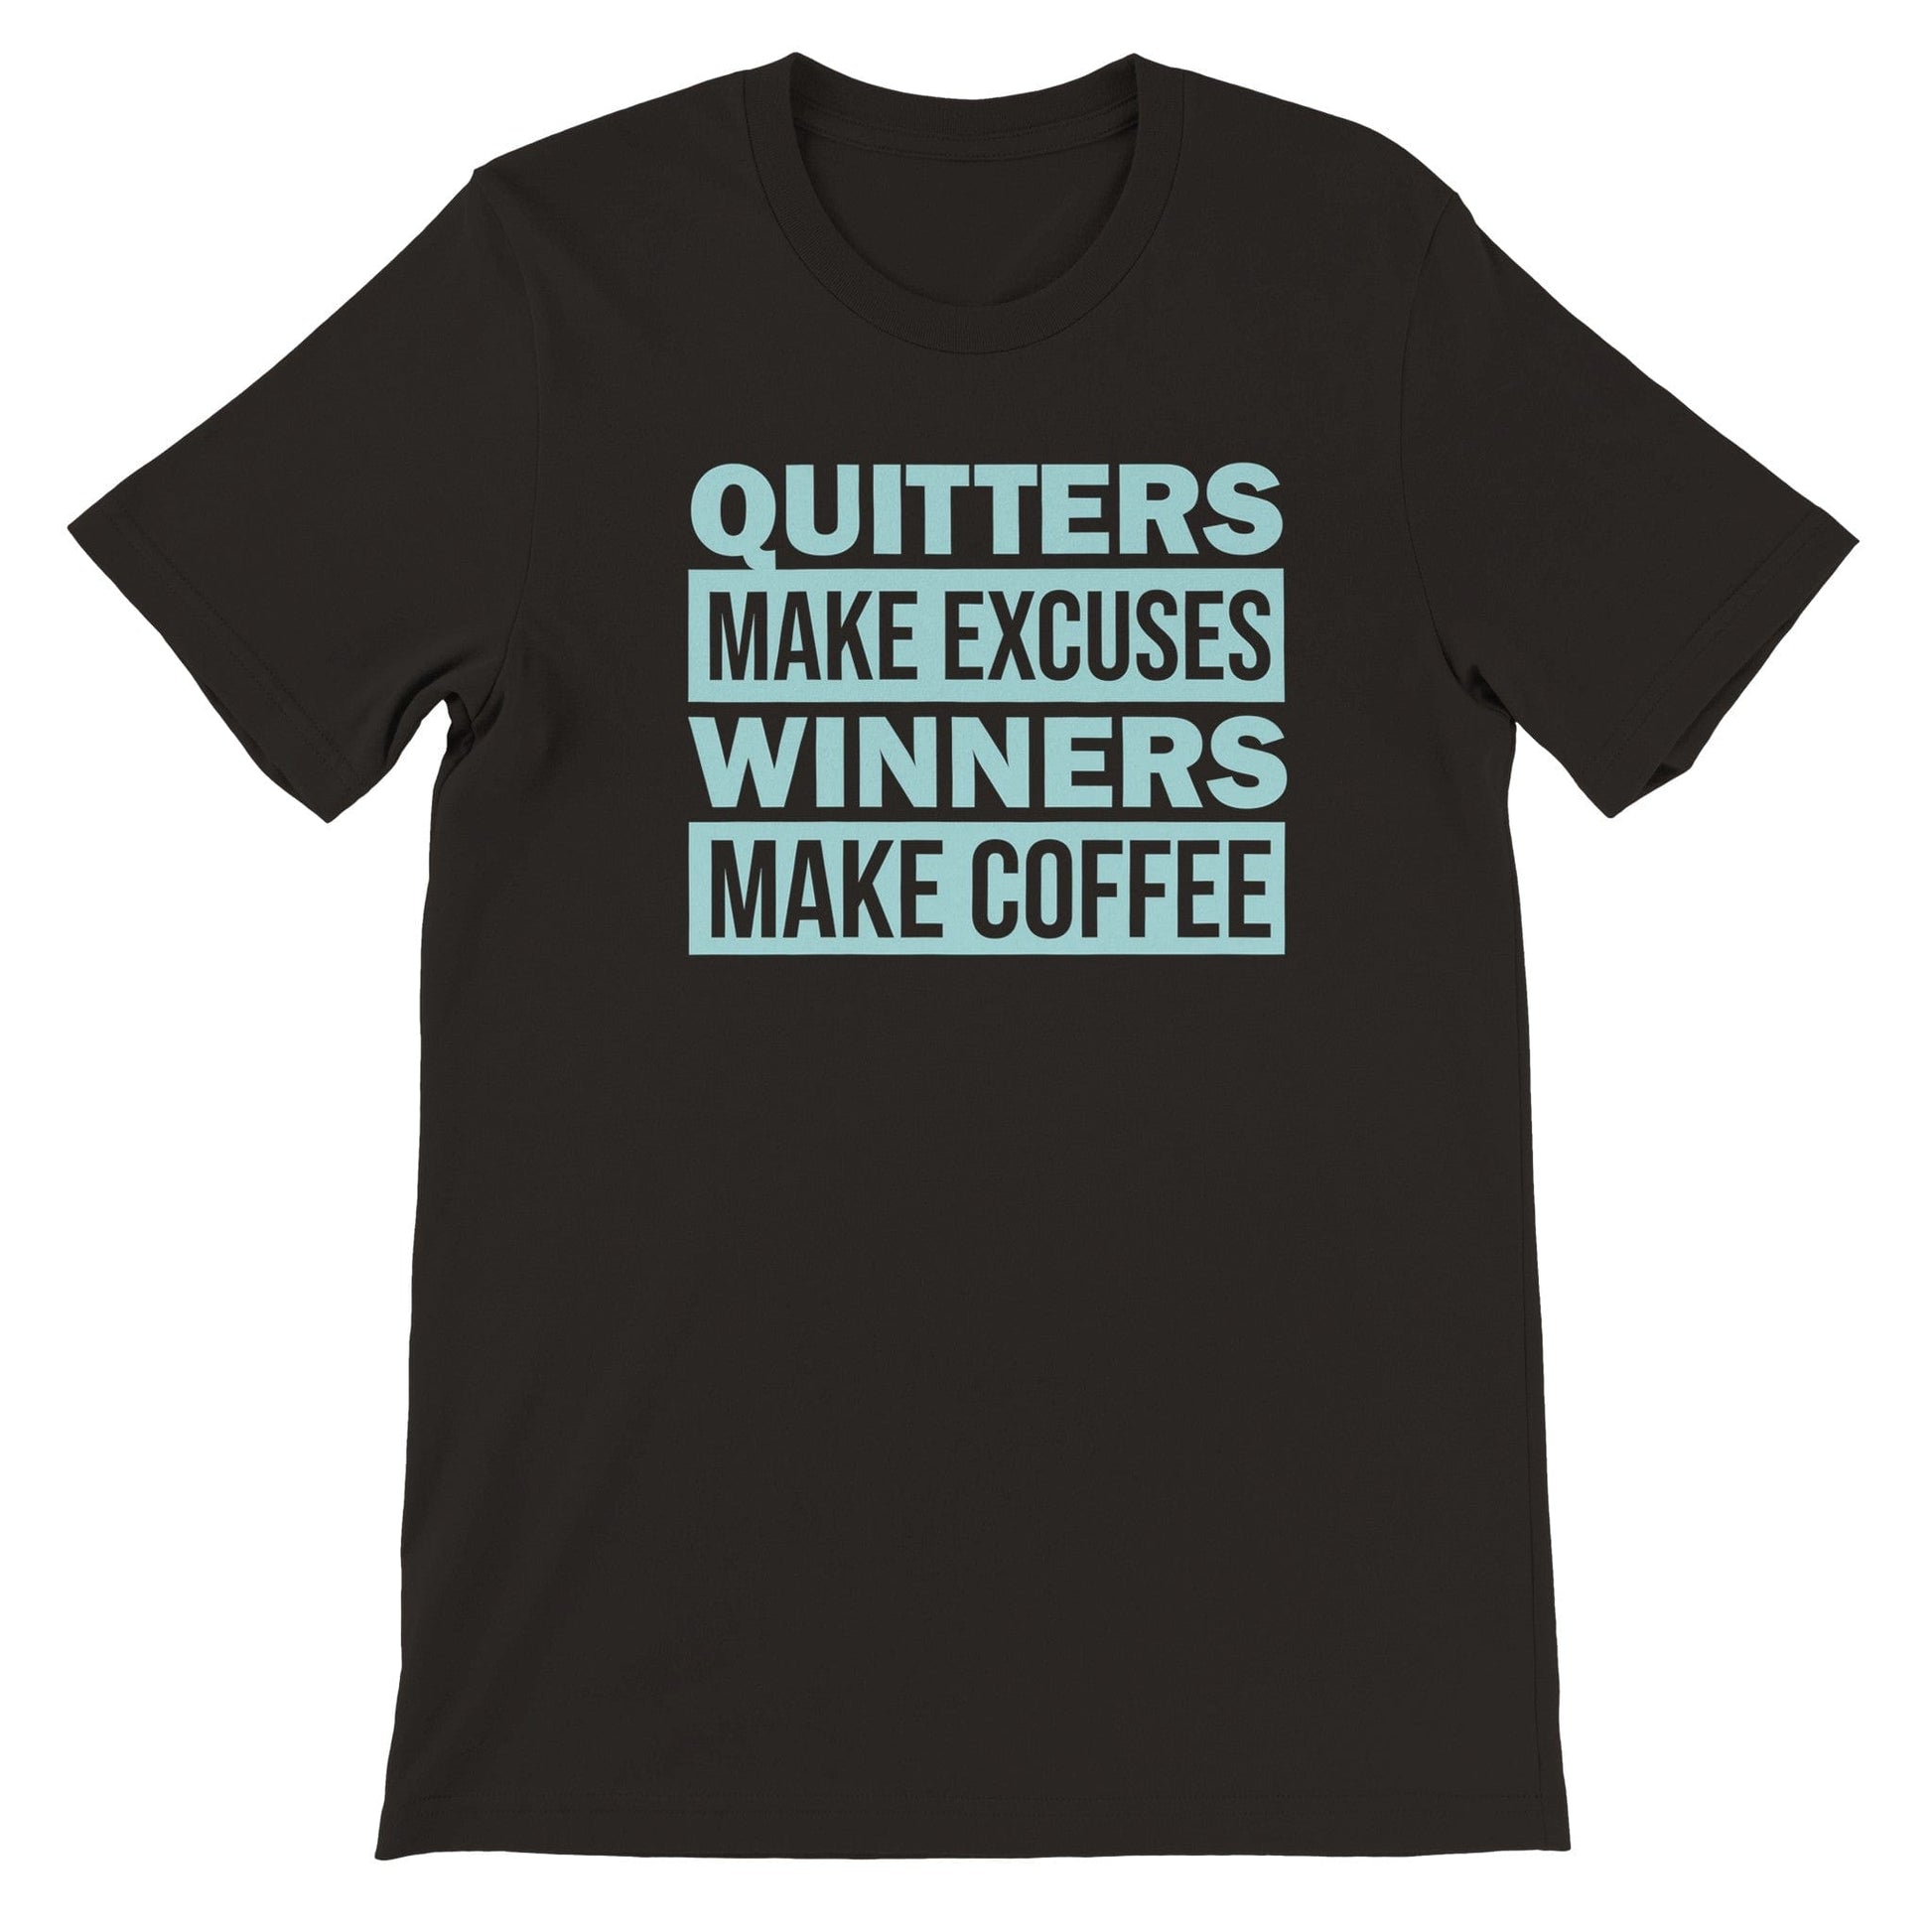 Good Bean Gifts Quitters Make Excuses, Winners make Coffee - Unisex Crewneck T-shirt Black / S